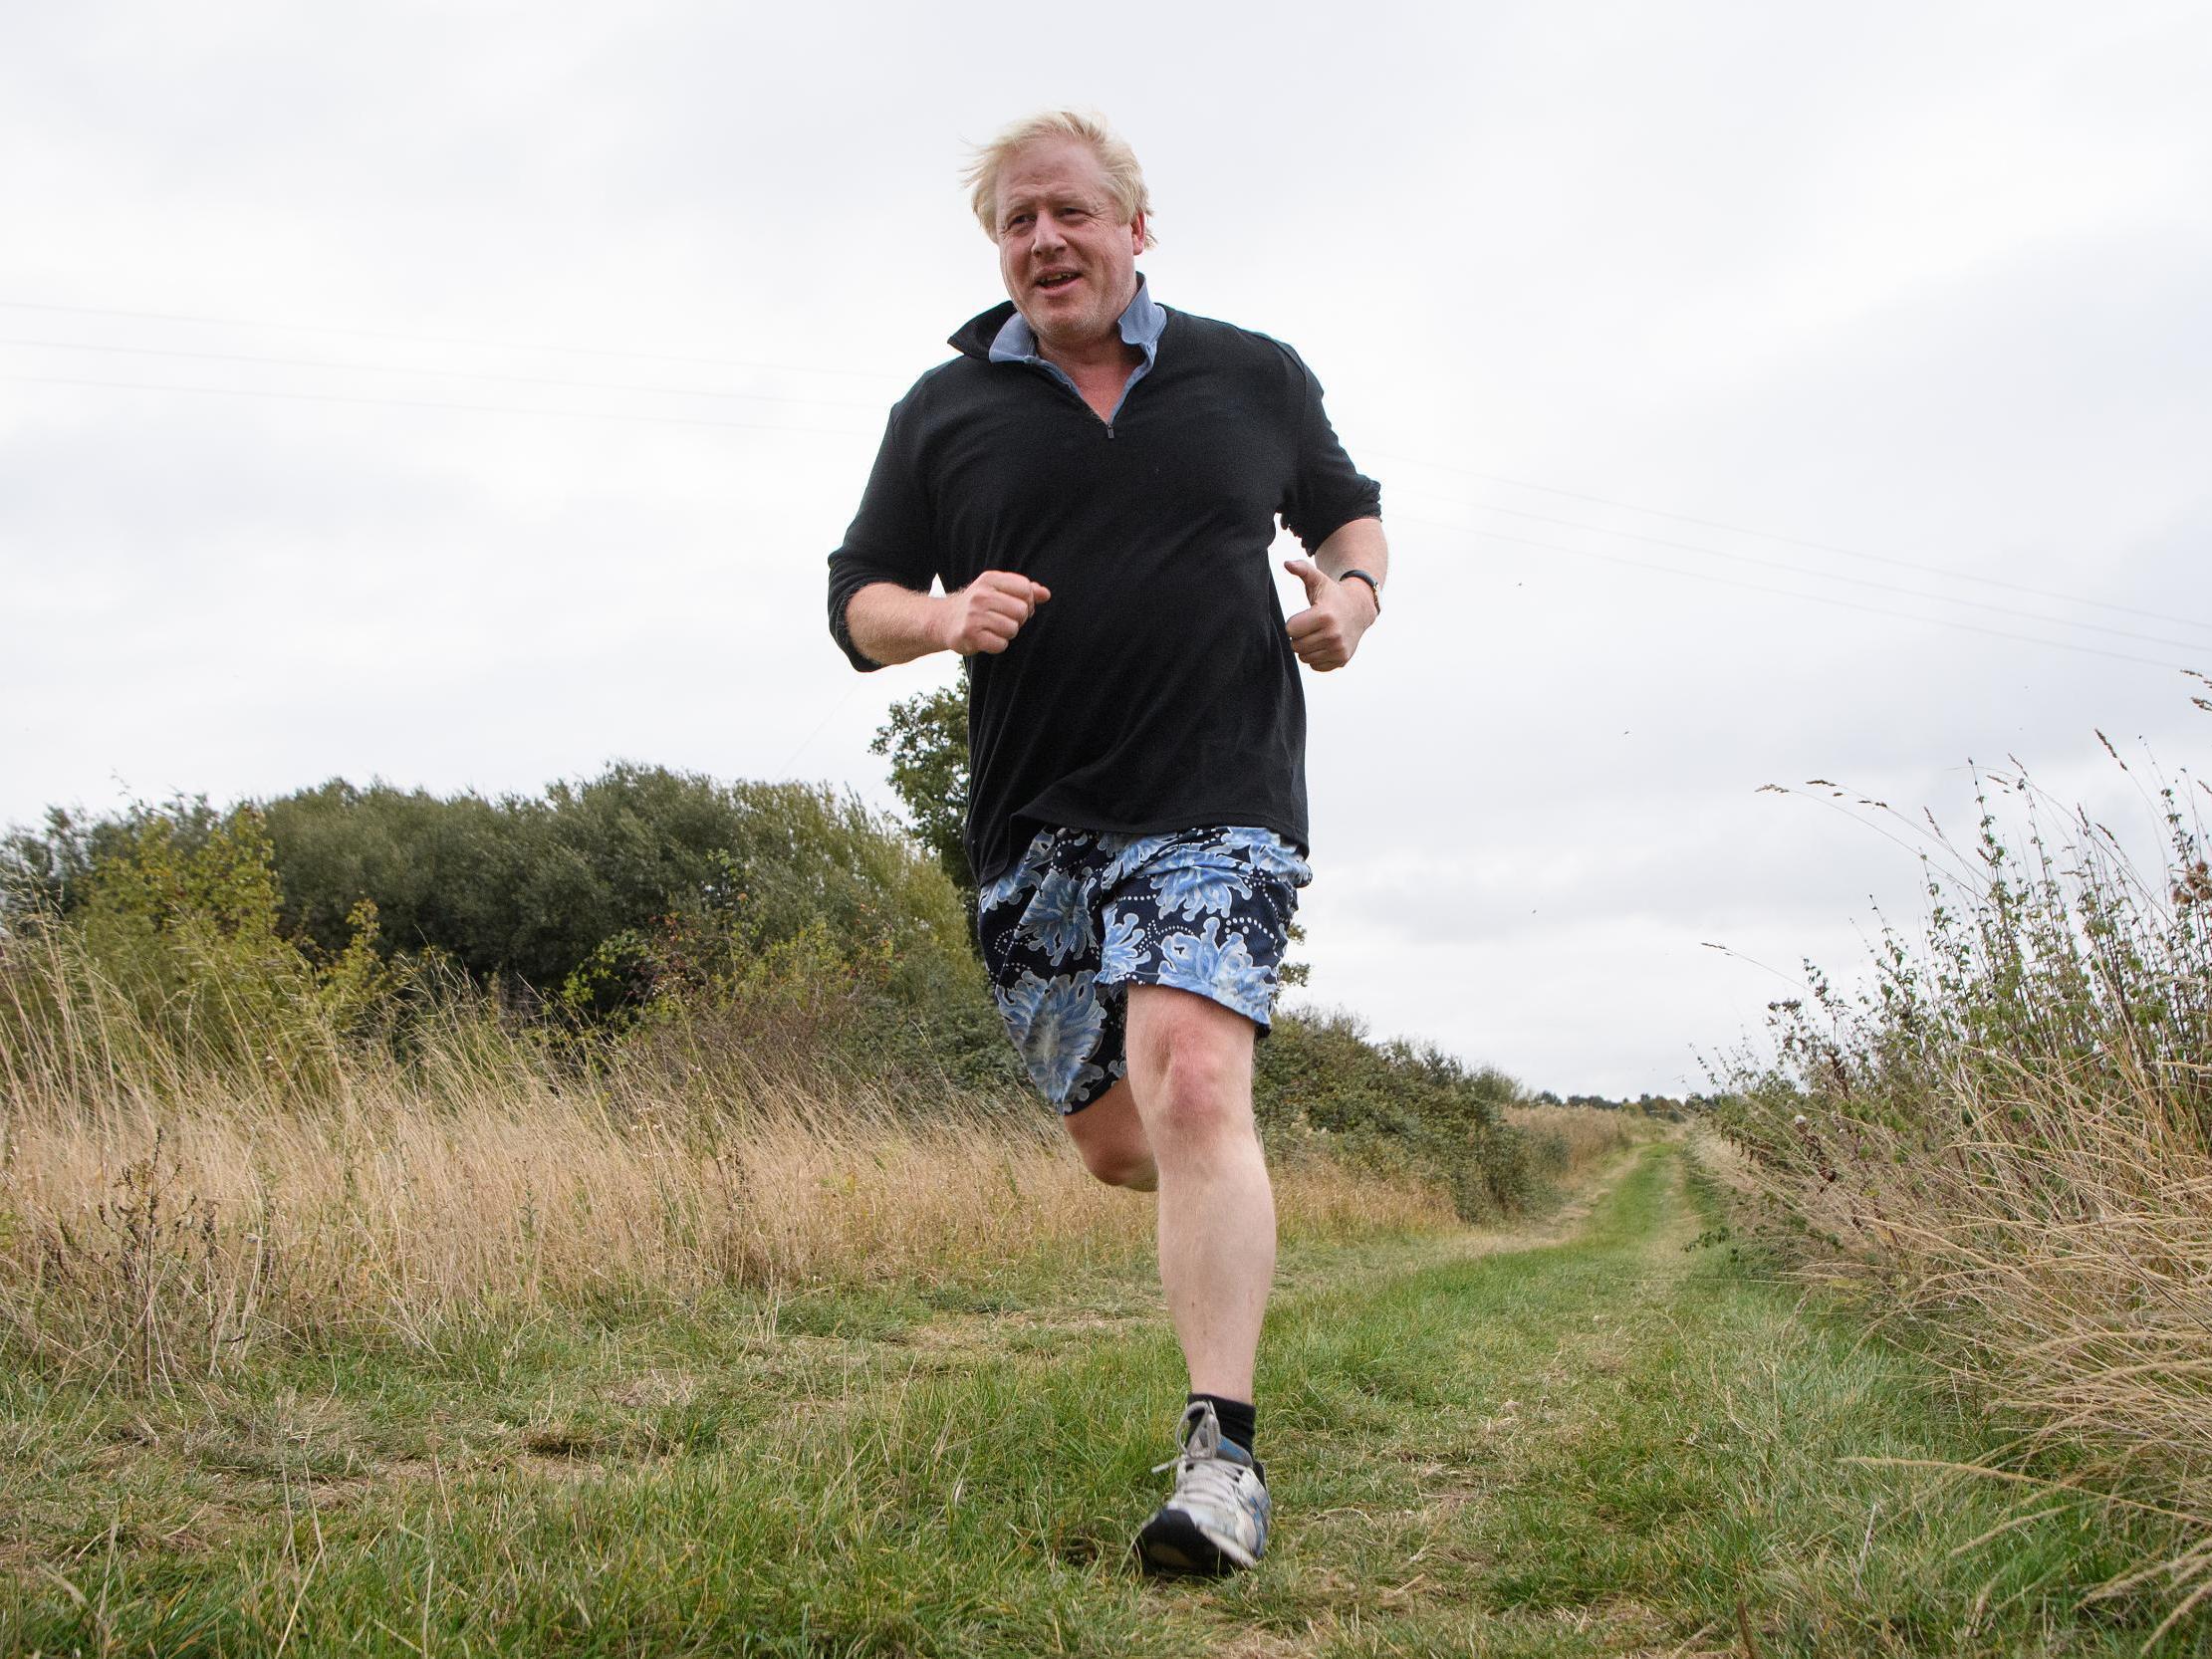 Snaps of the PM exercising are no advert for health benefits